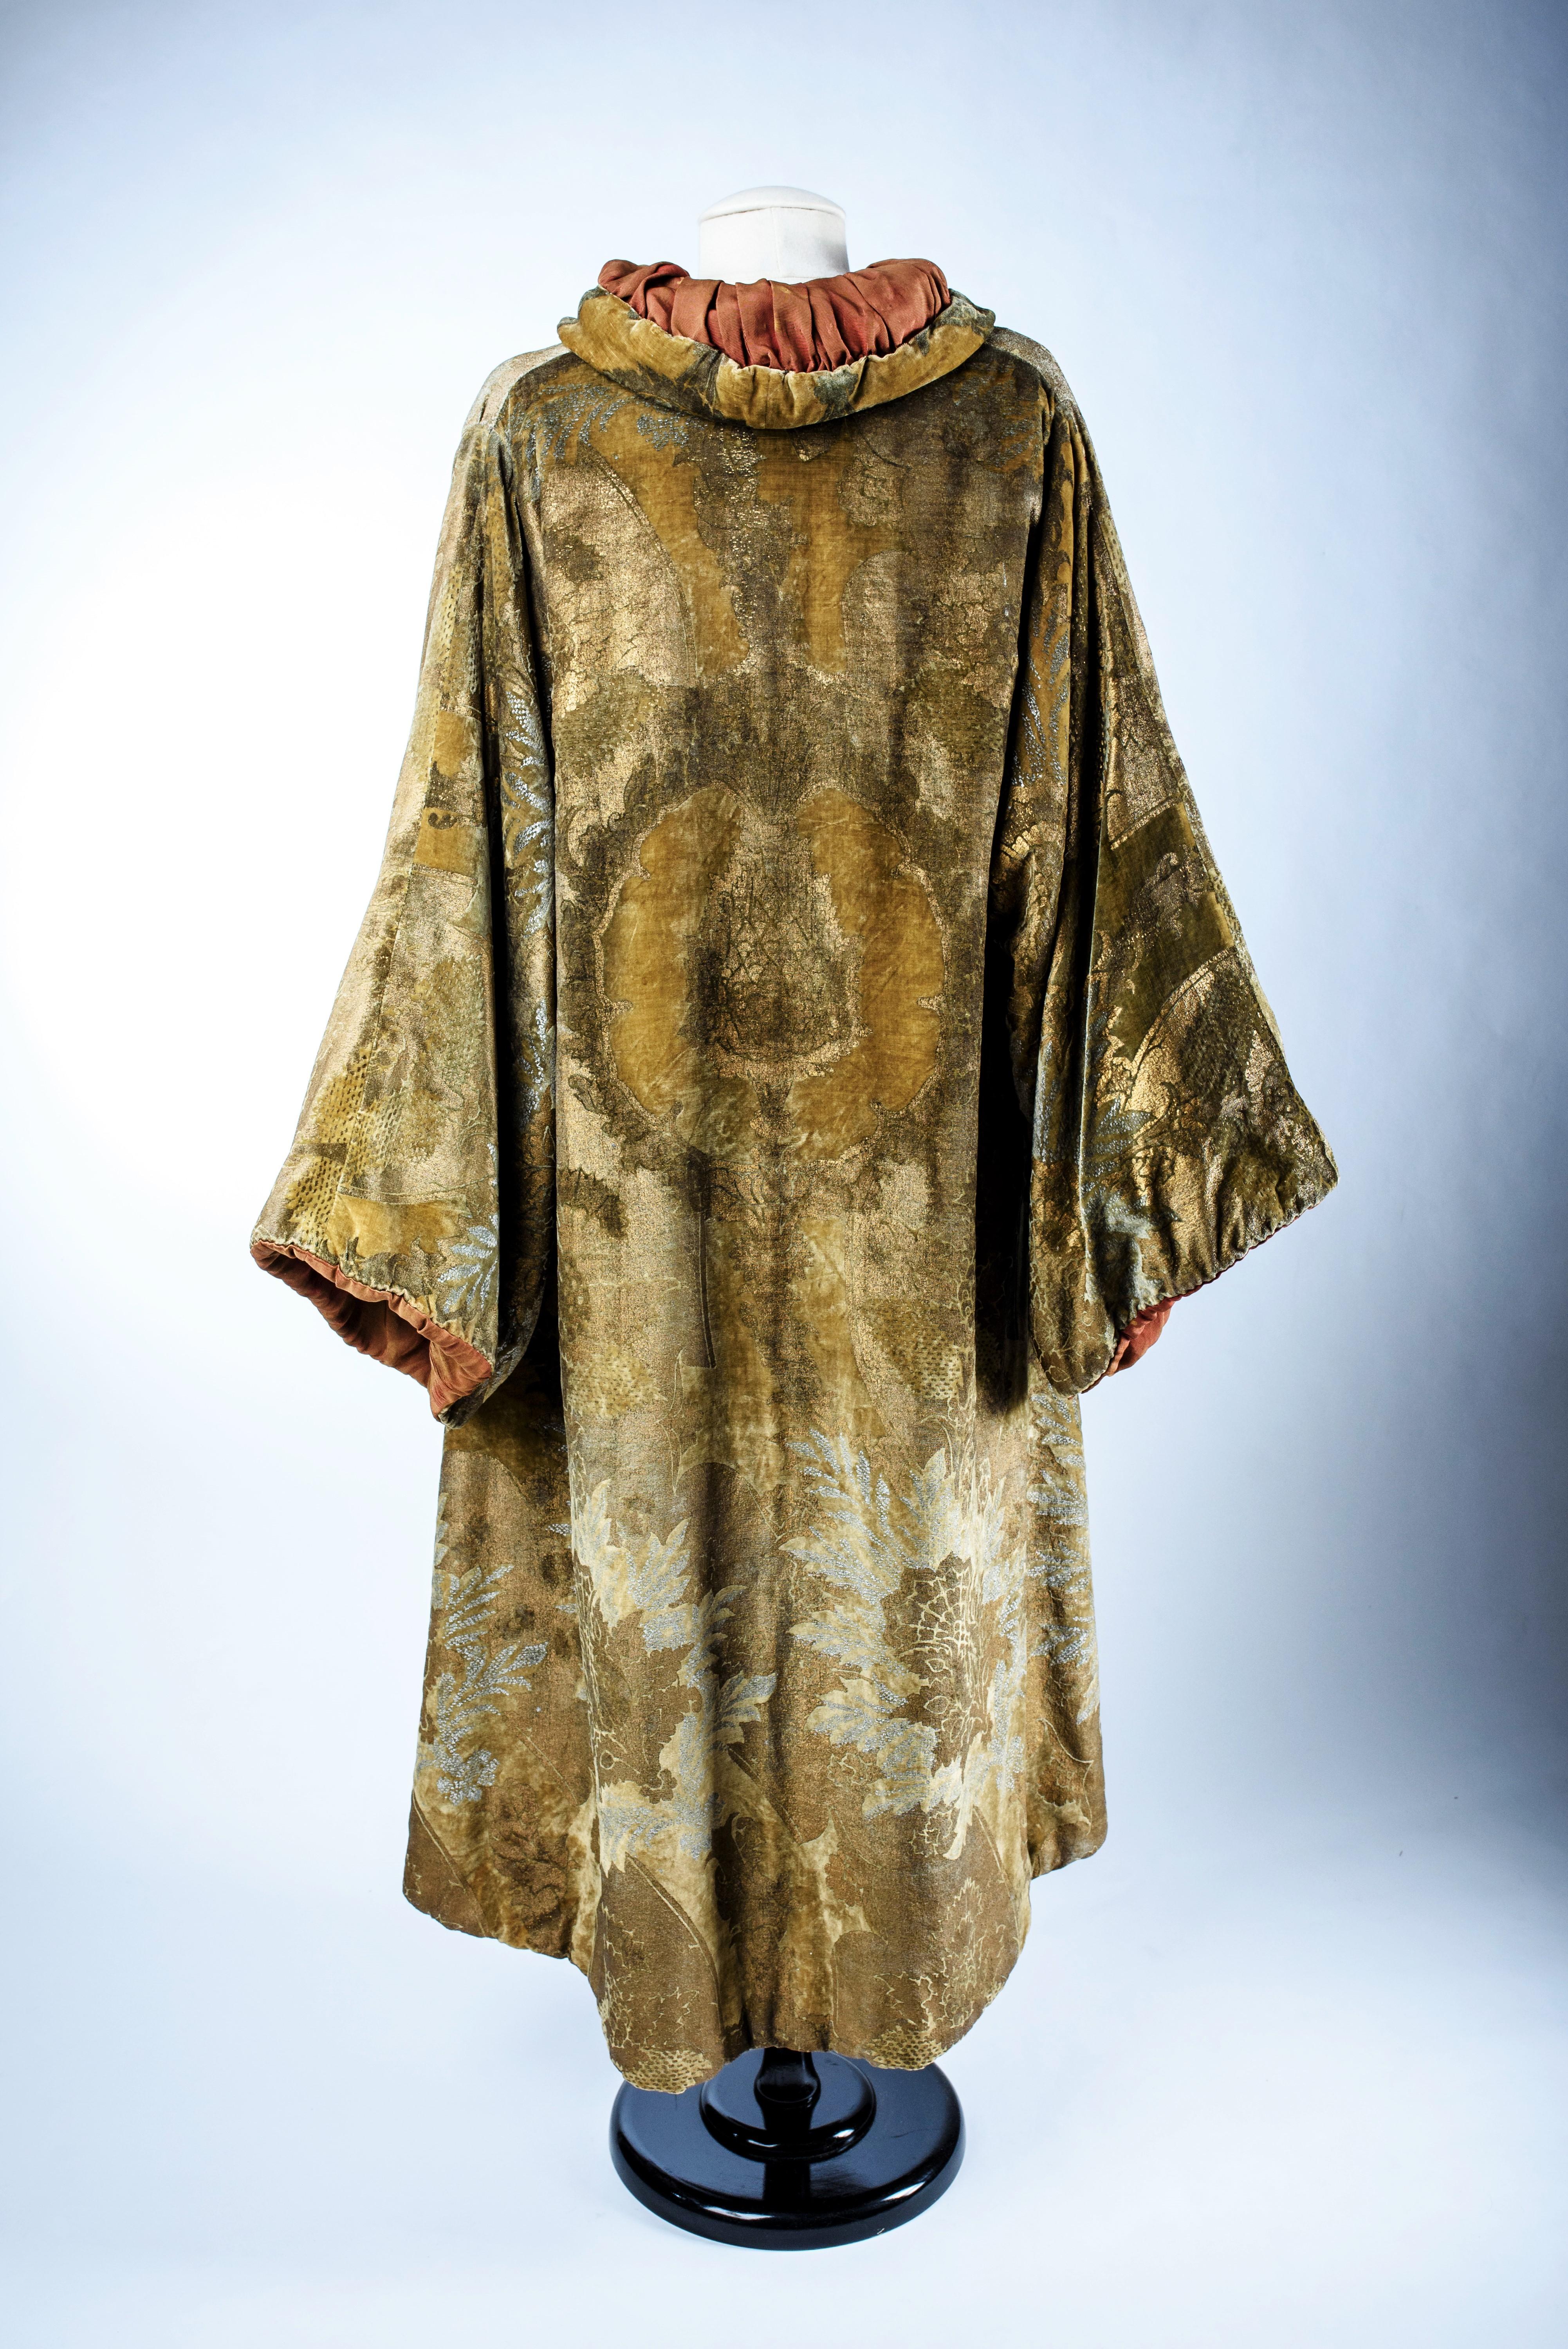 A Mariano Fortuny Gold and Silver Printed Velvet Evening Coat -Venice Circa 1925 13